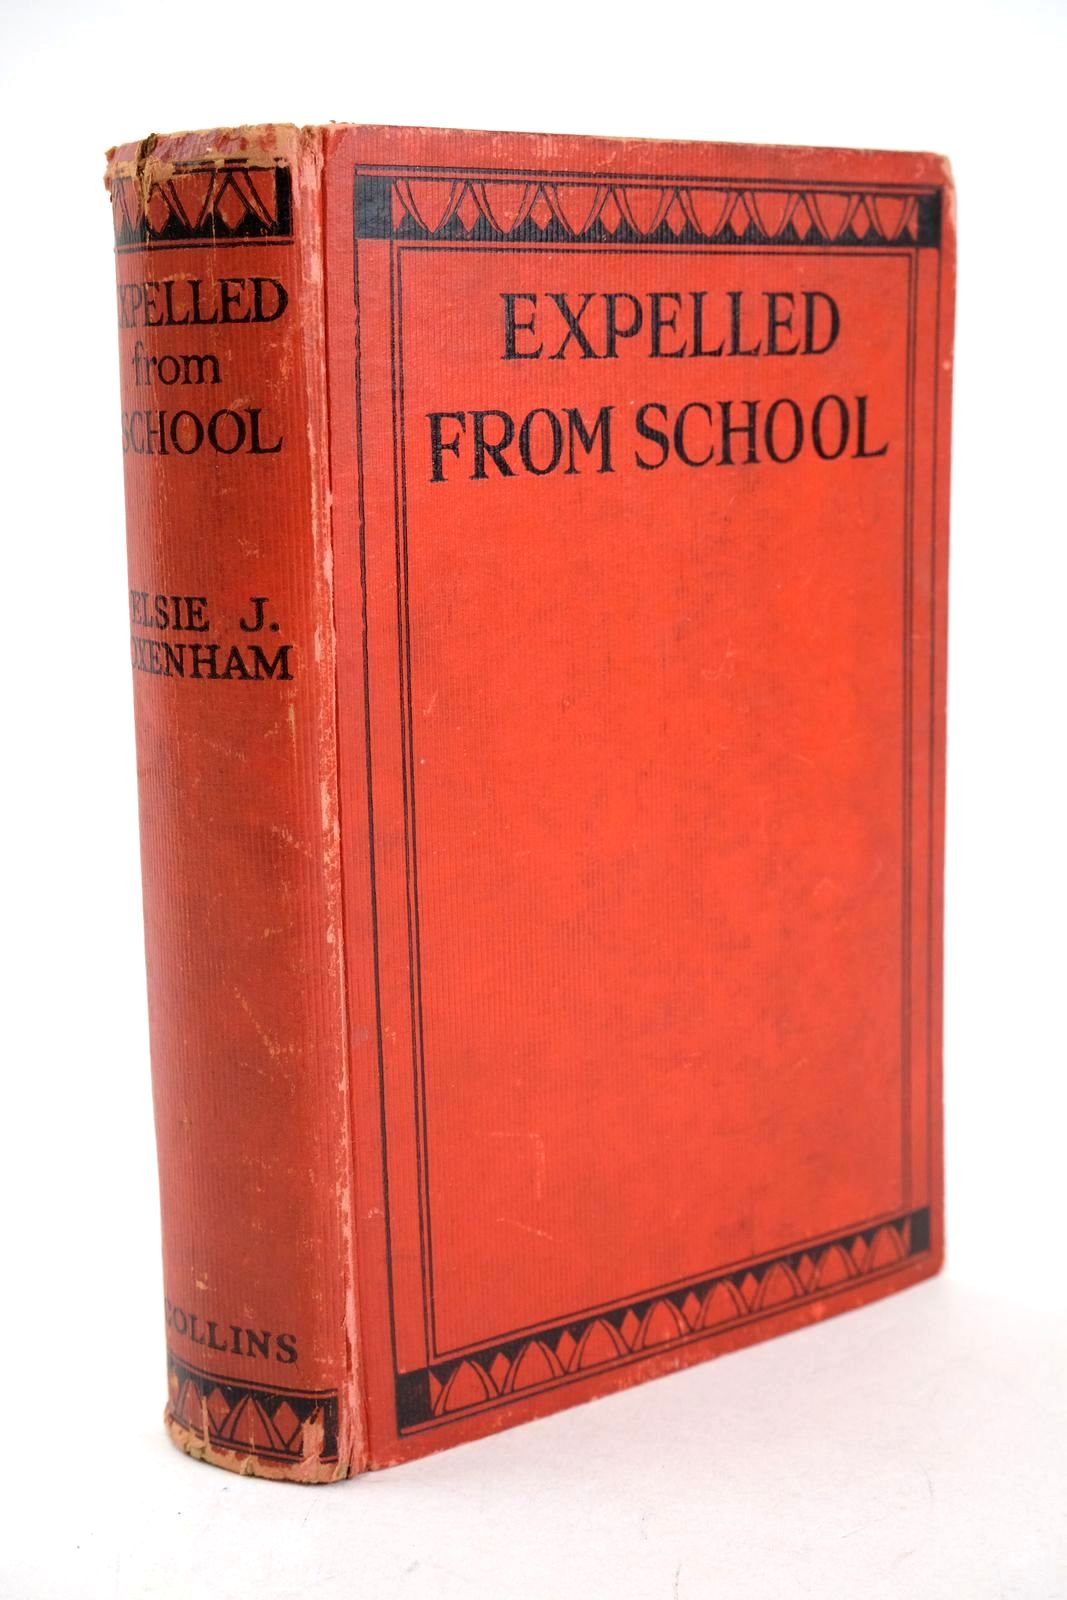 Photo of EXPELLED FROM SCHOOL written by Oxenham, Elsie J. published by Collins Clear-Type Press (STOCK CODE: 1326857)  for sale by Stella & Rose's Books